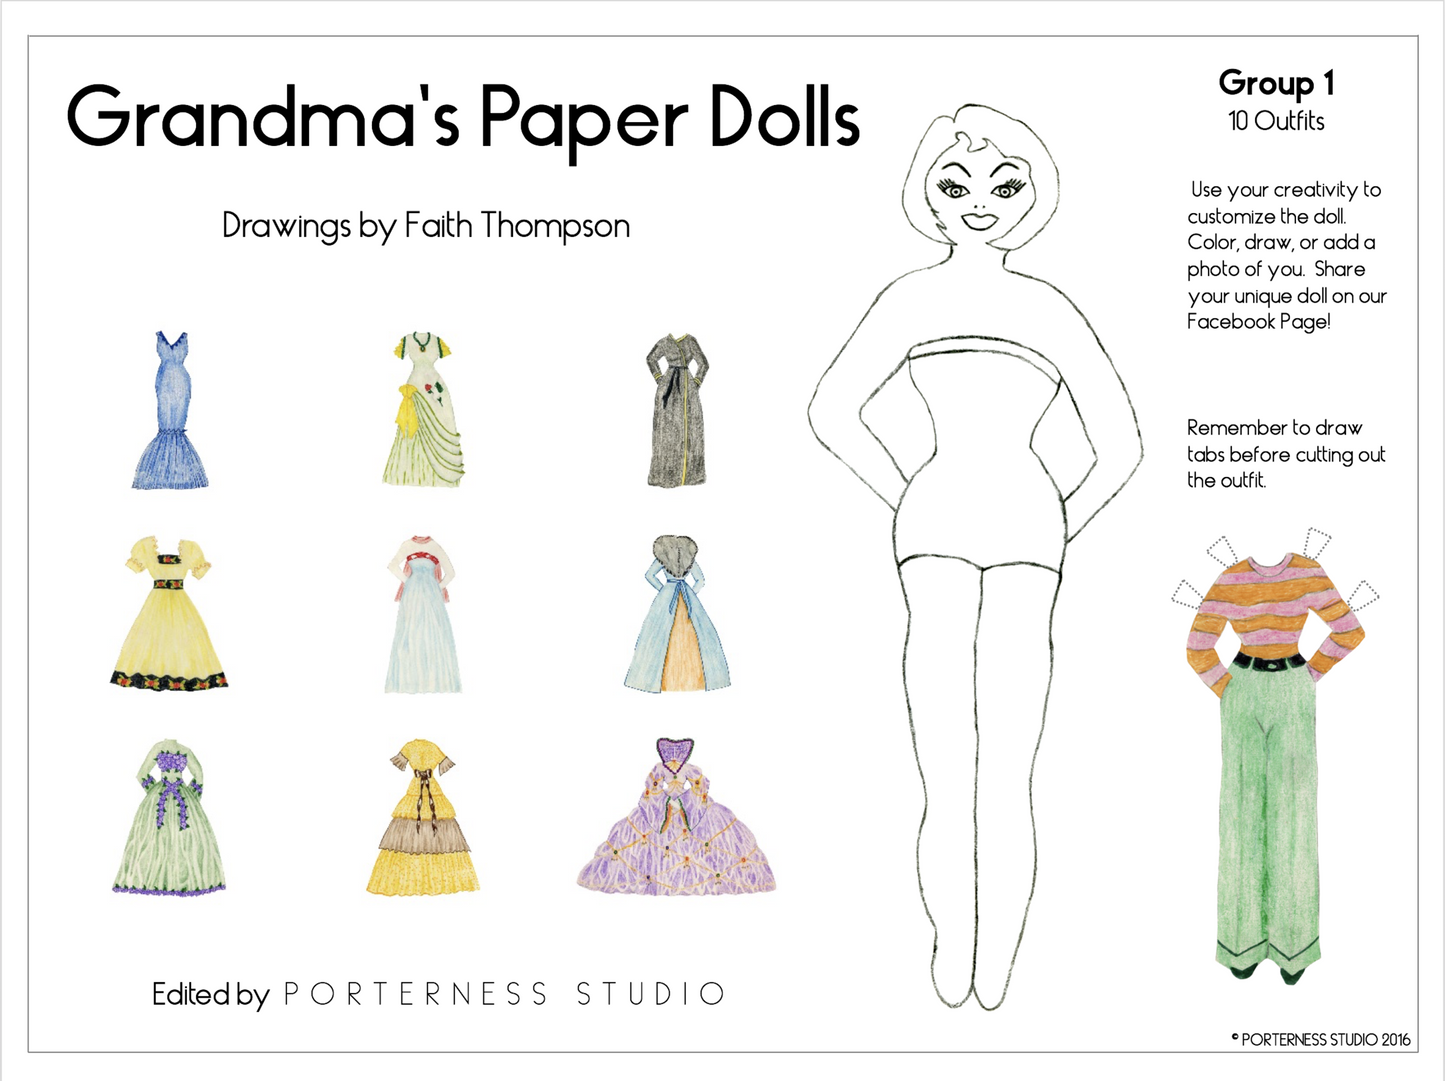 Grandma's Paper Doll - 1 Doll & 10 Outfits - Group 1 - Free PDF Download